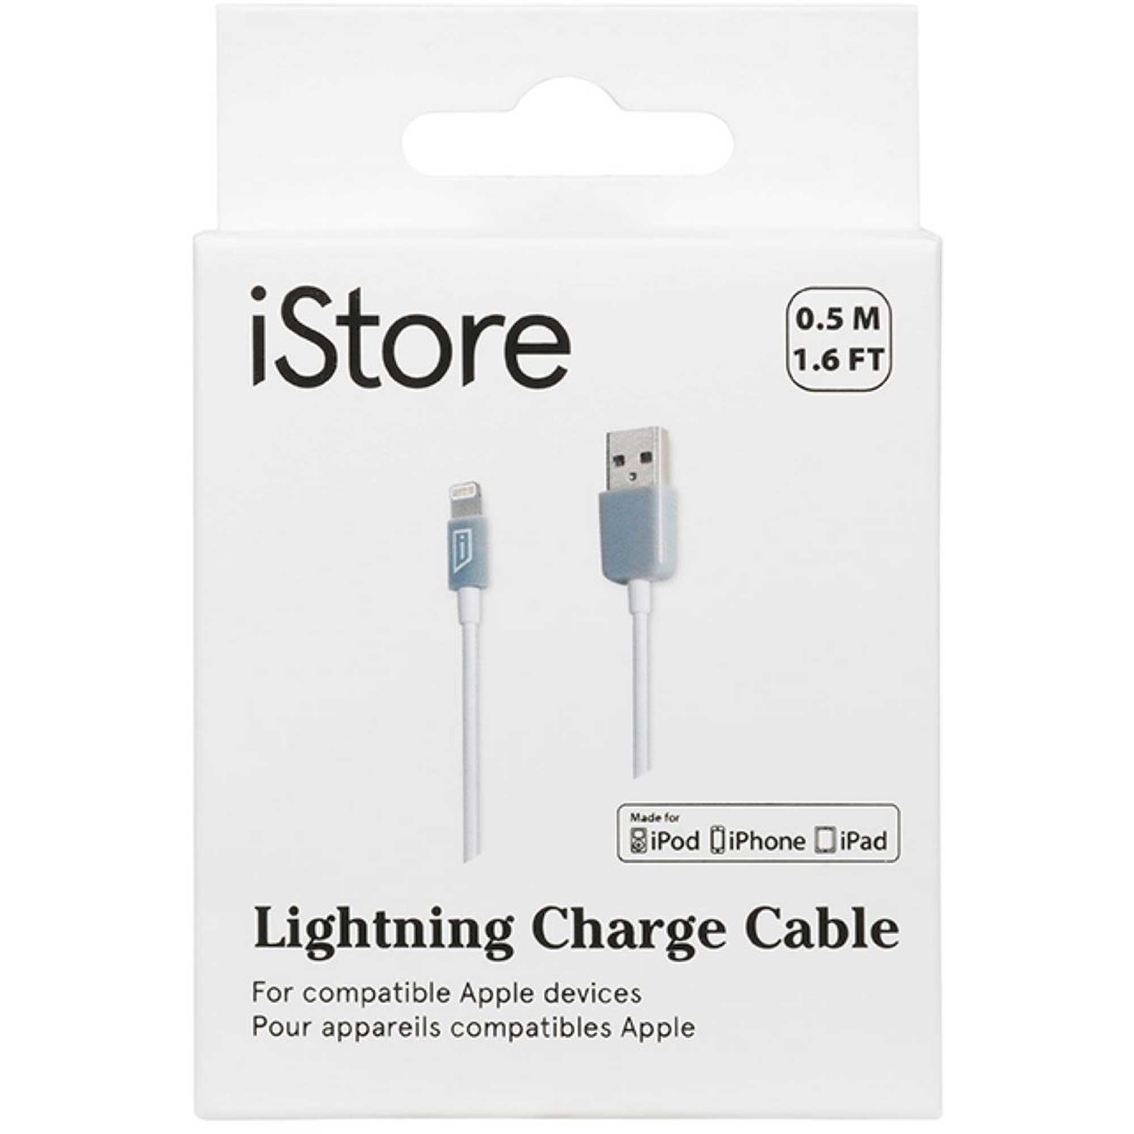 Targus iStore Lightning Charge 1.8 ft. Cable - Image 1 of 3